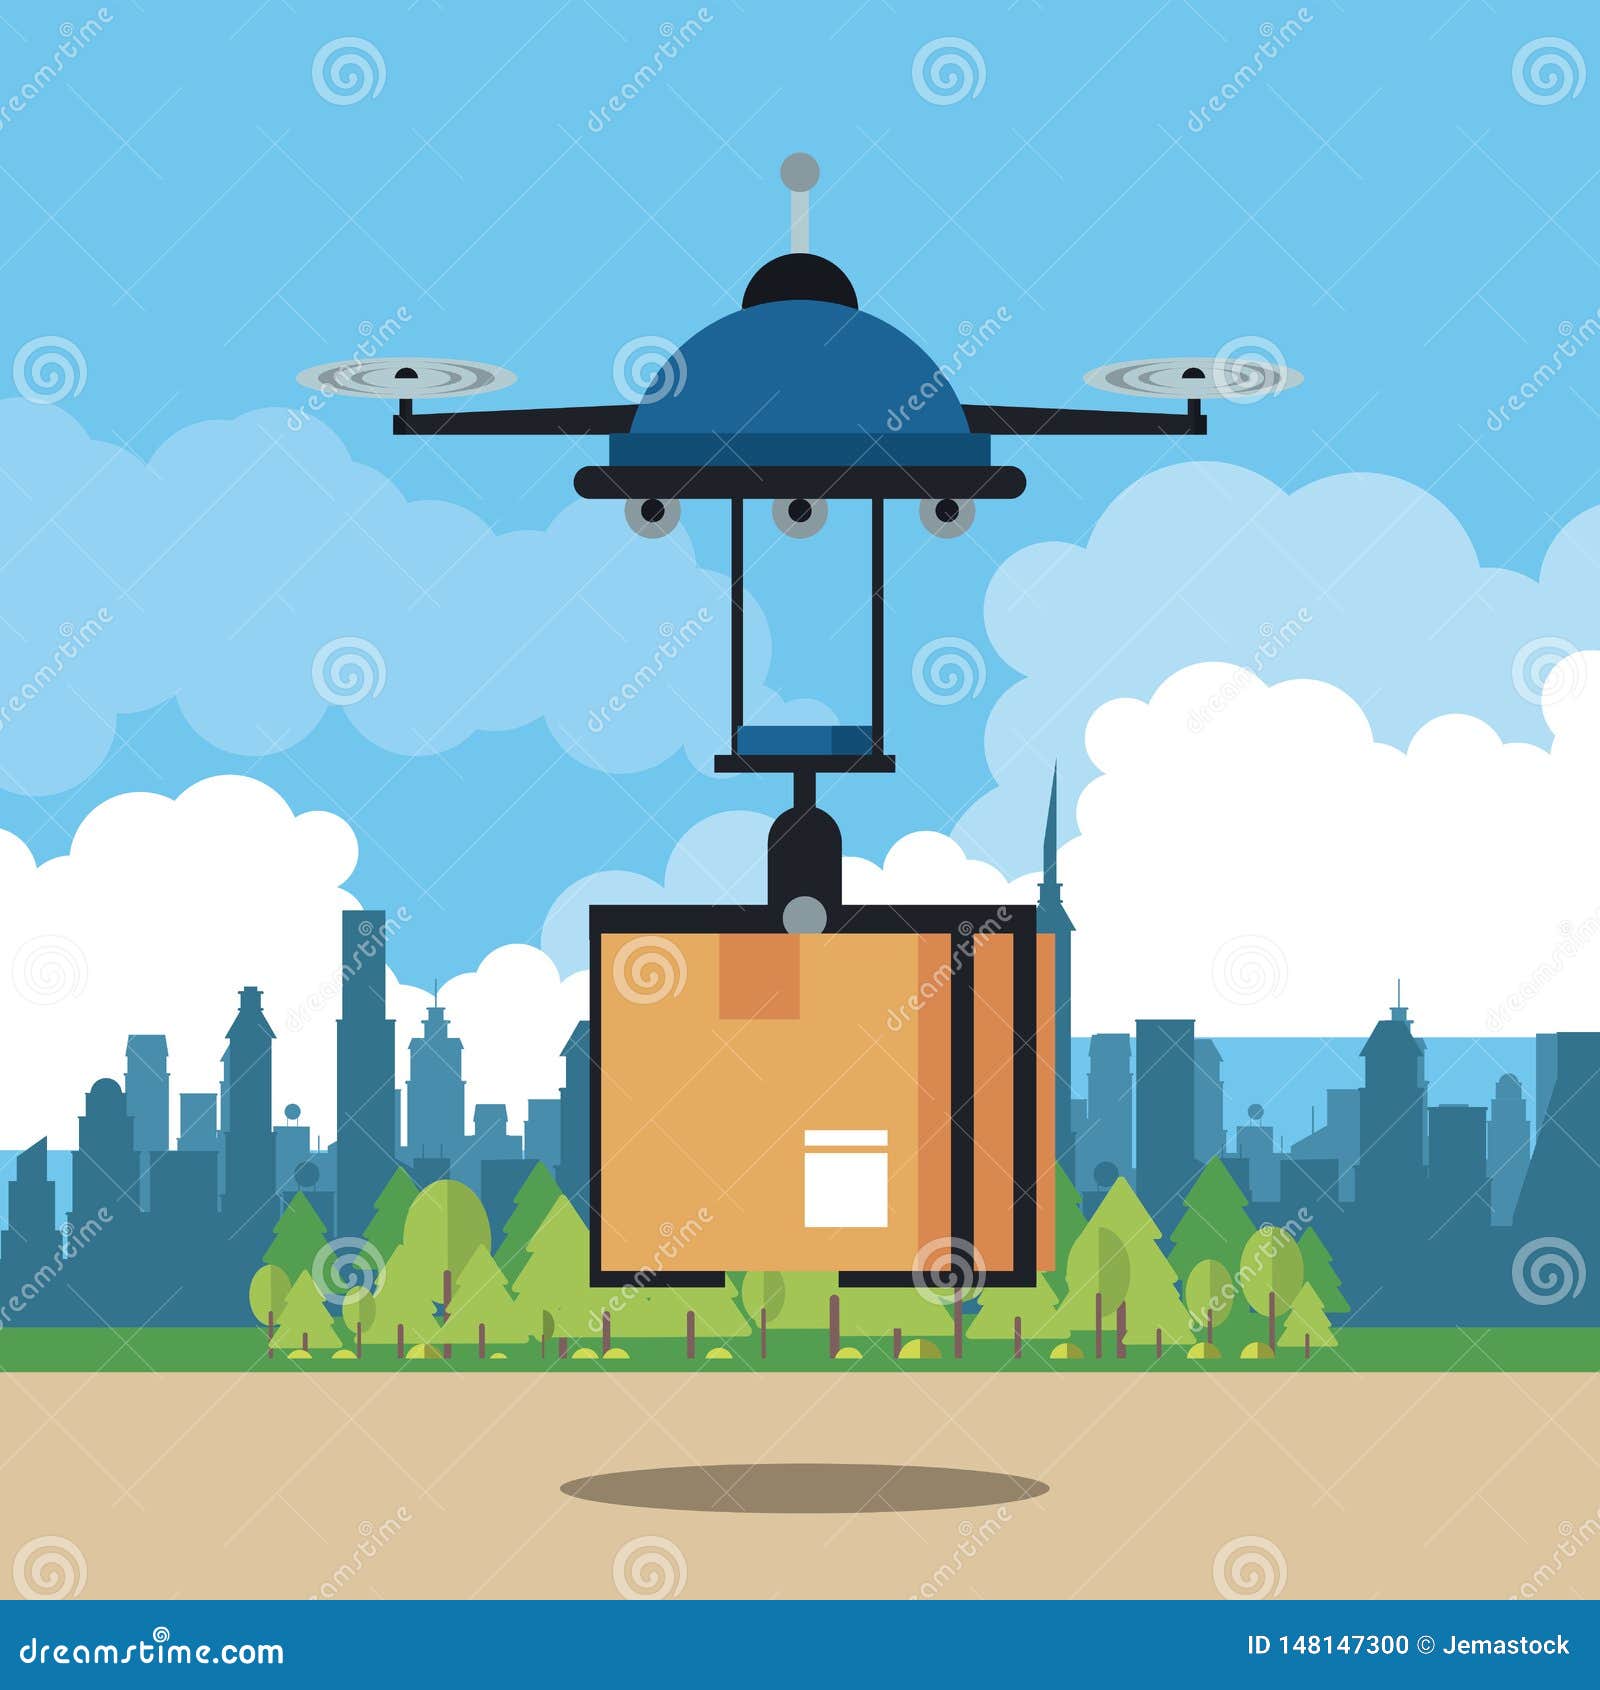 Drone Delivering Box at City Stock Vector